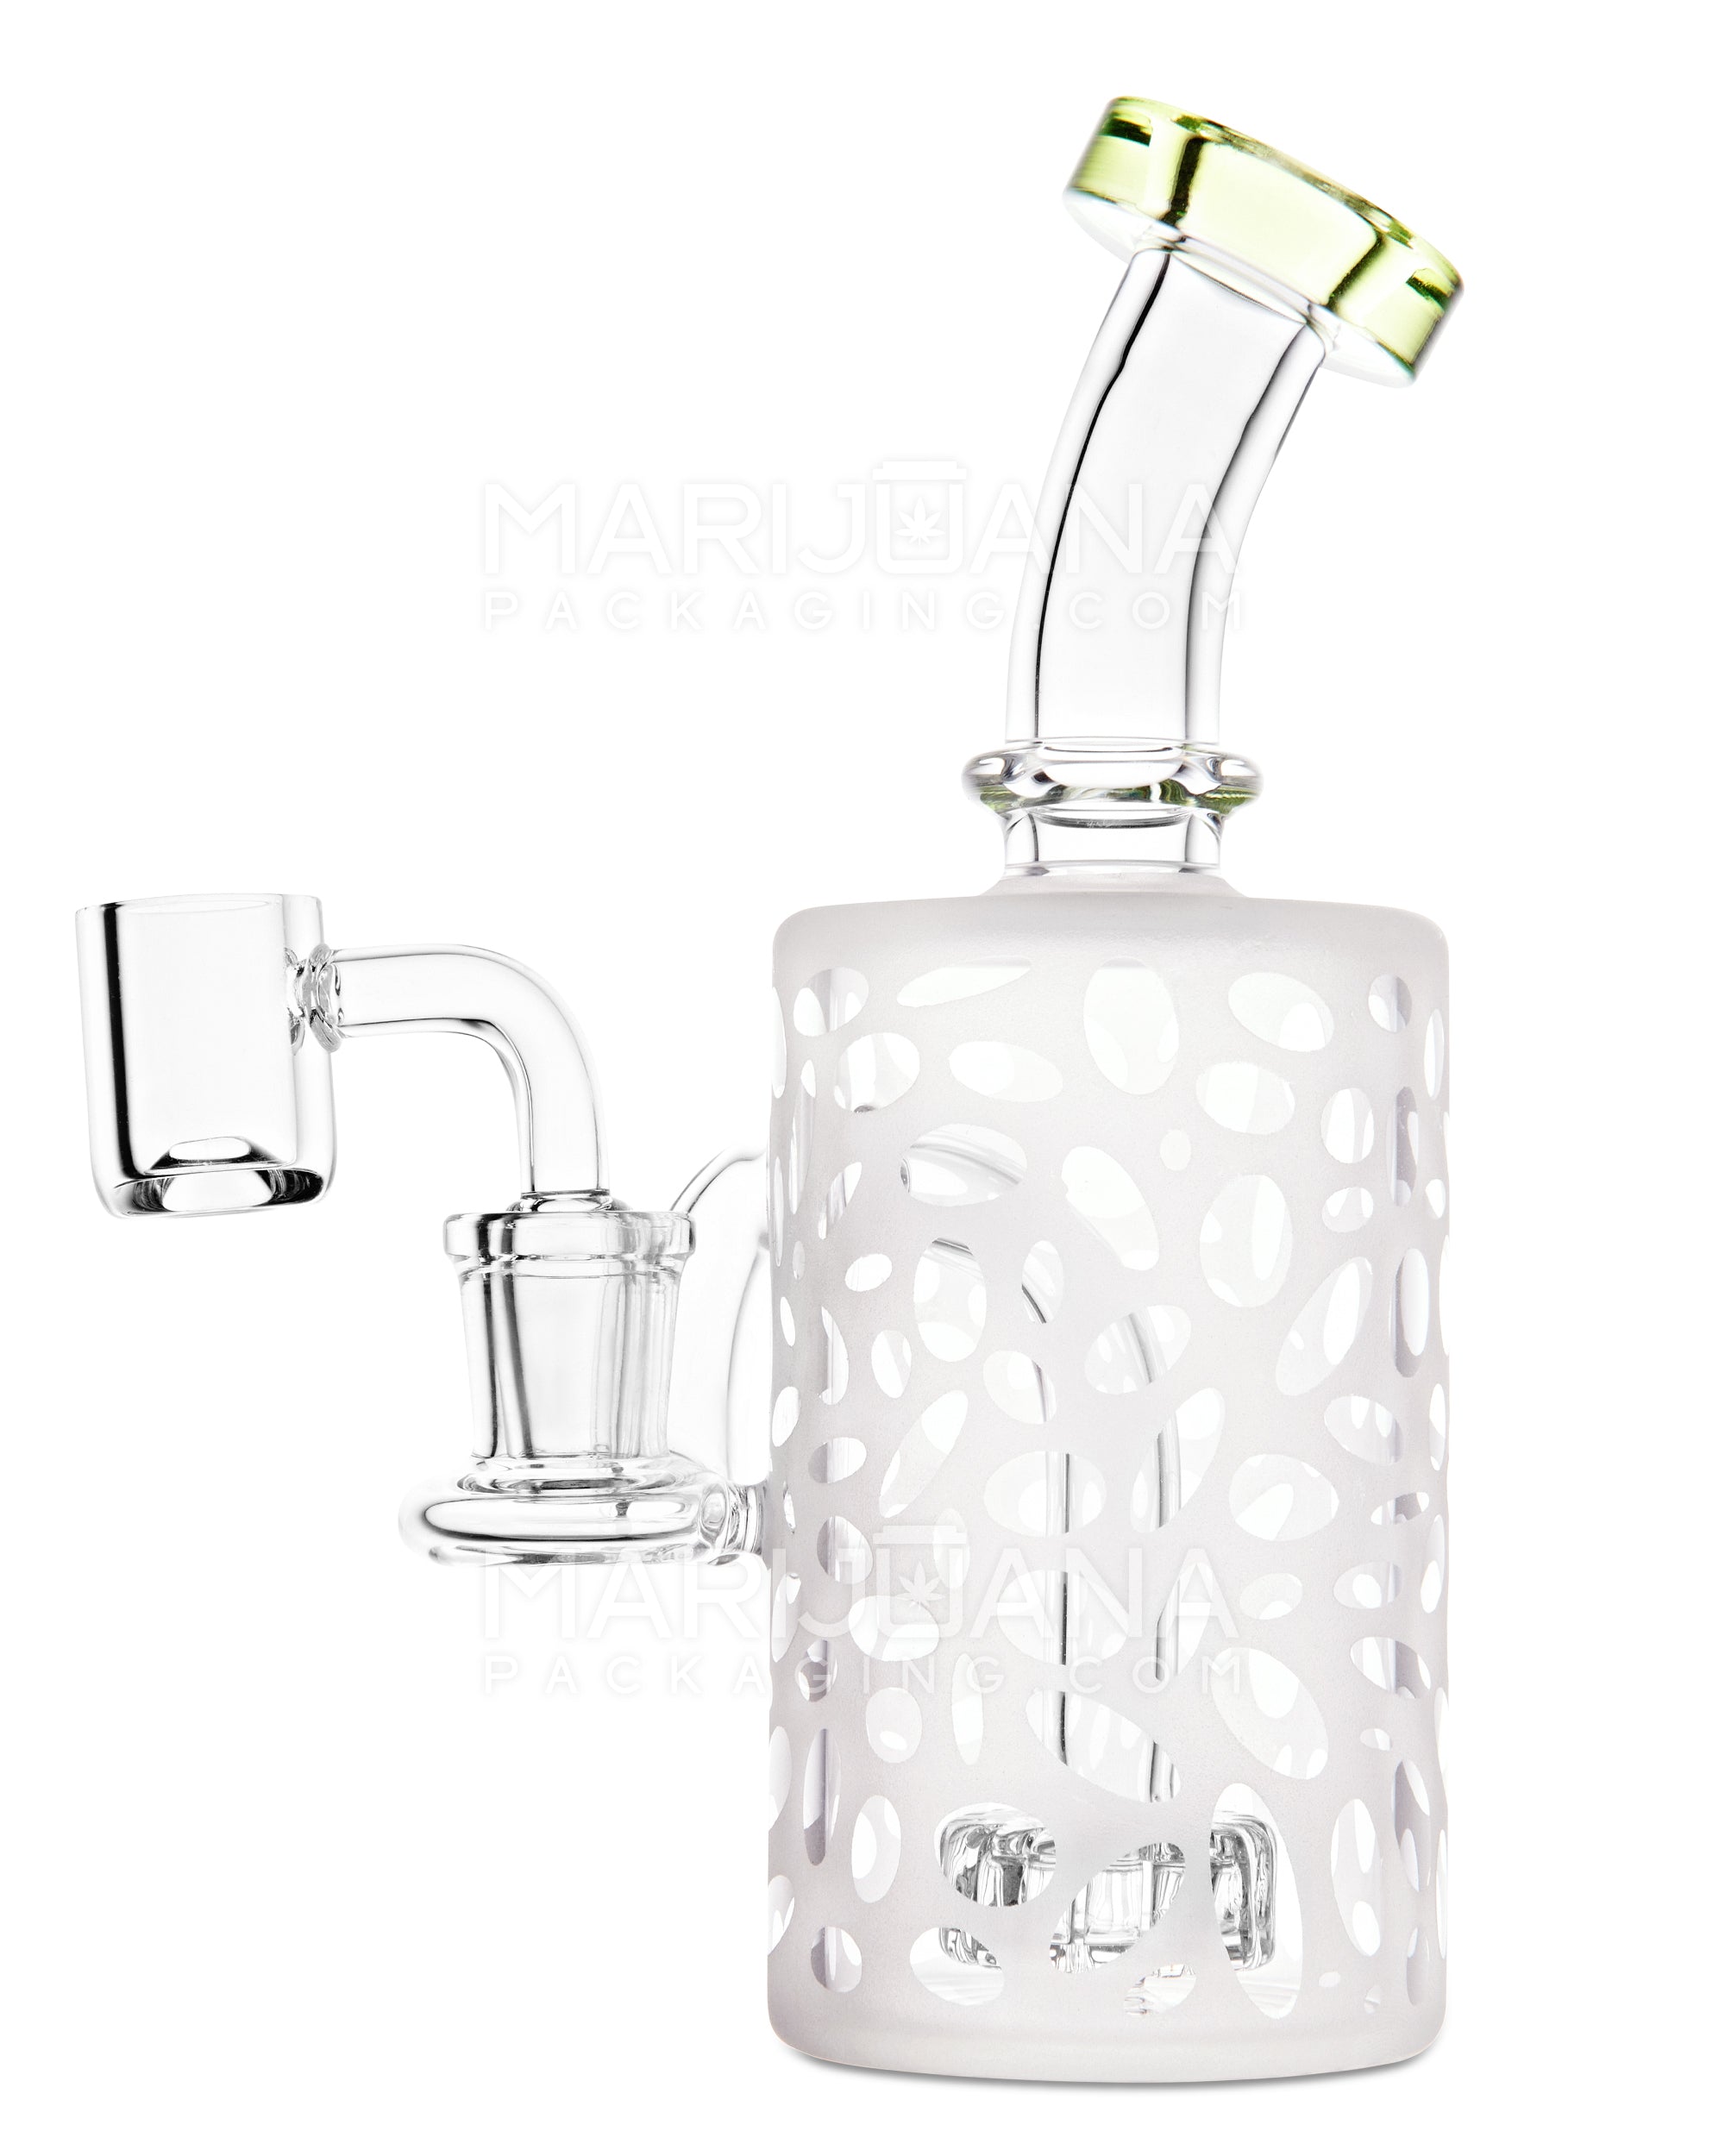 Bent Neck Showerhead Perc Sandblasted Glass Dab Rig w/ Thick Base | 6in Tall - 14mm Banger - Green - 2